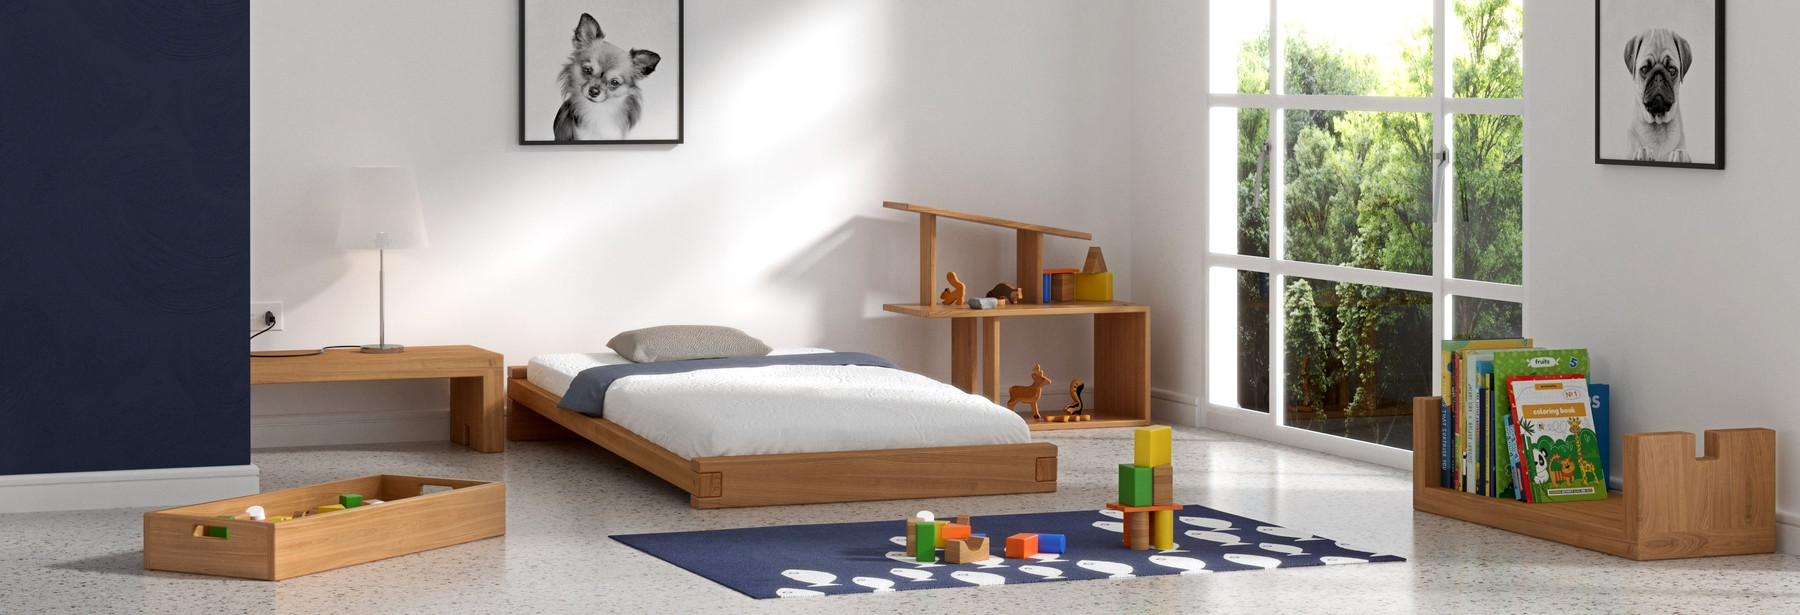 Minimalist toddler/ child bedroom with solid wood furniture